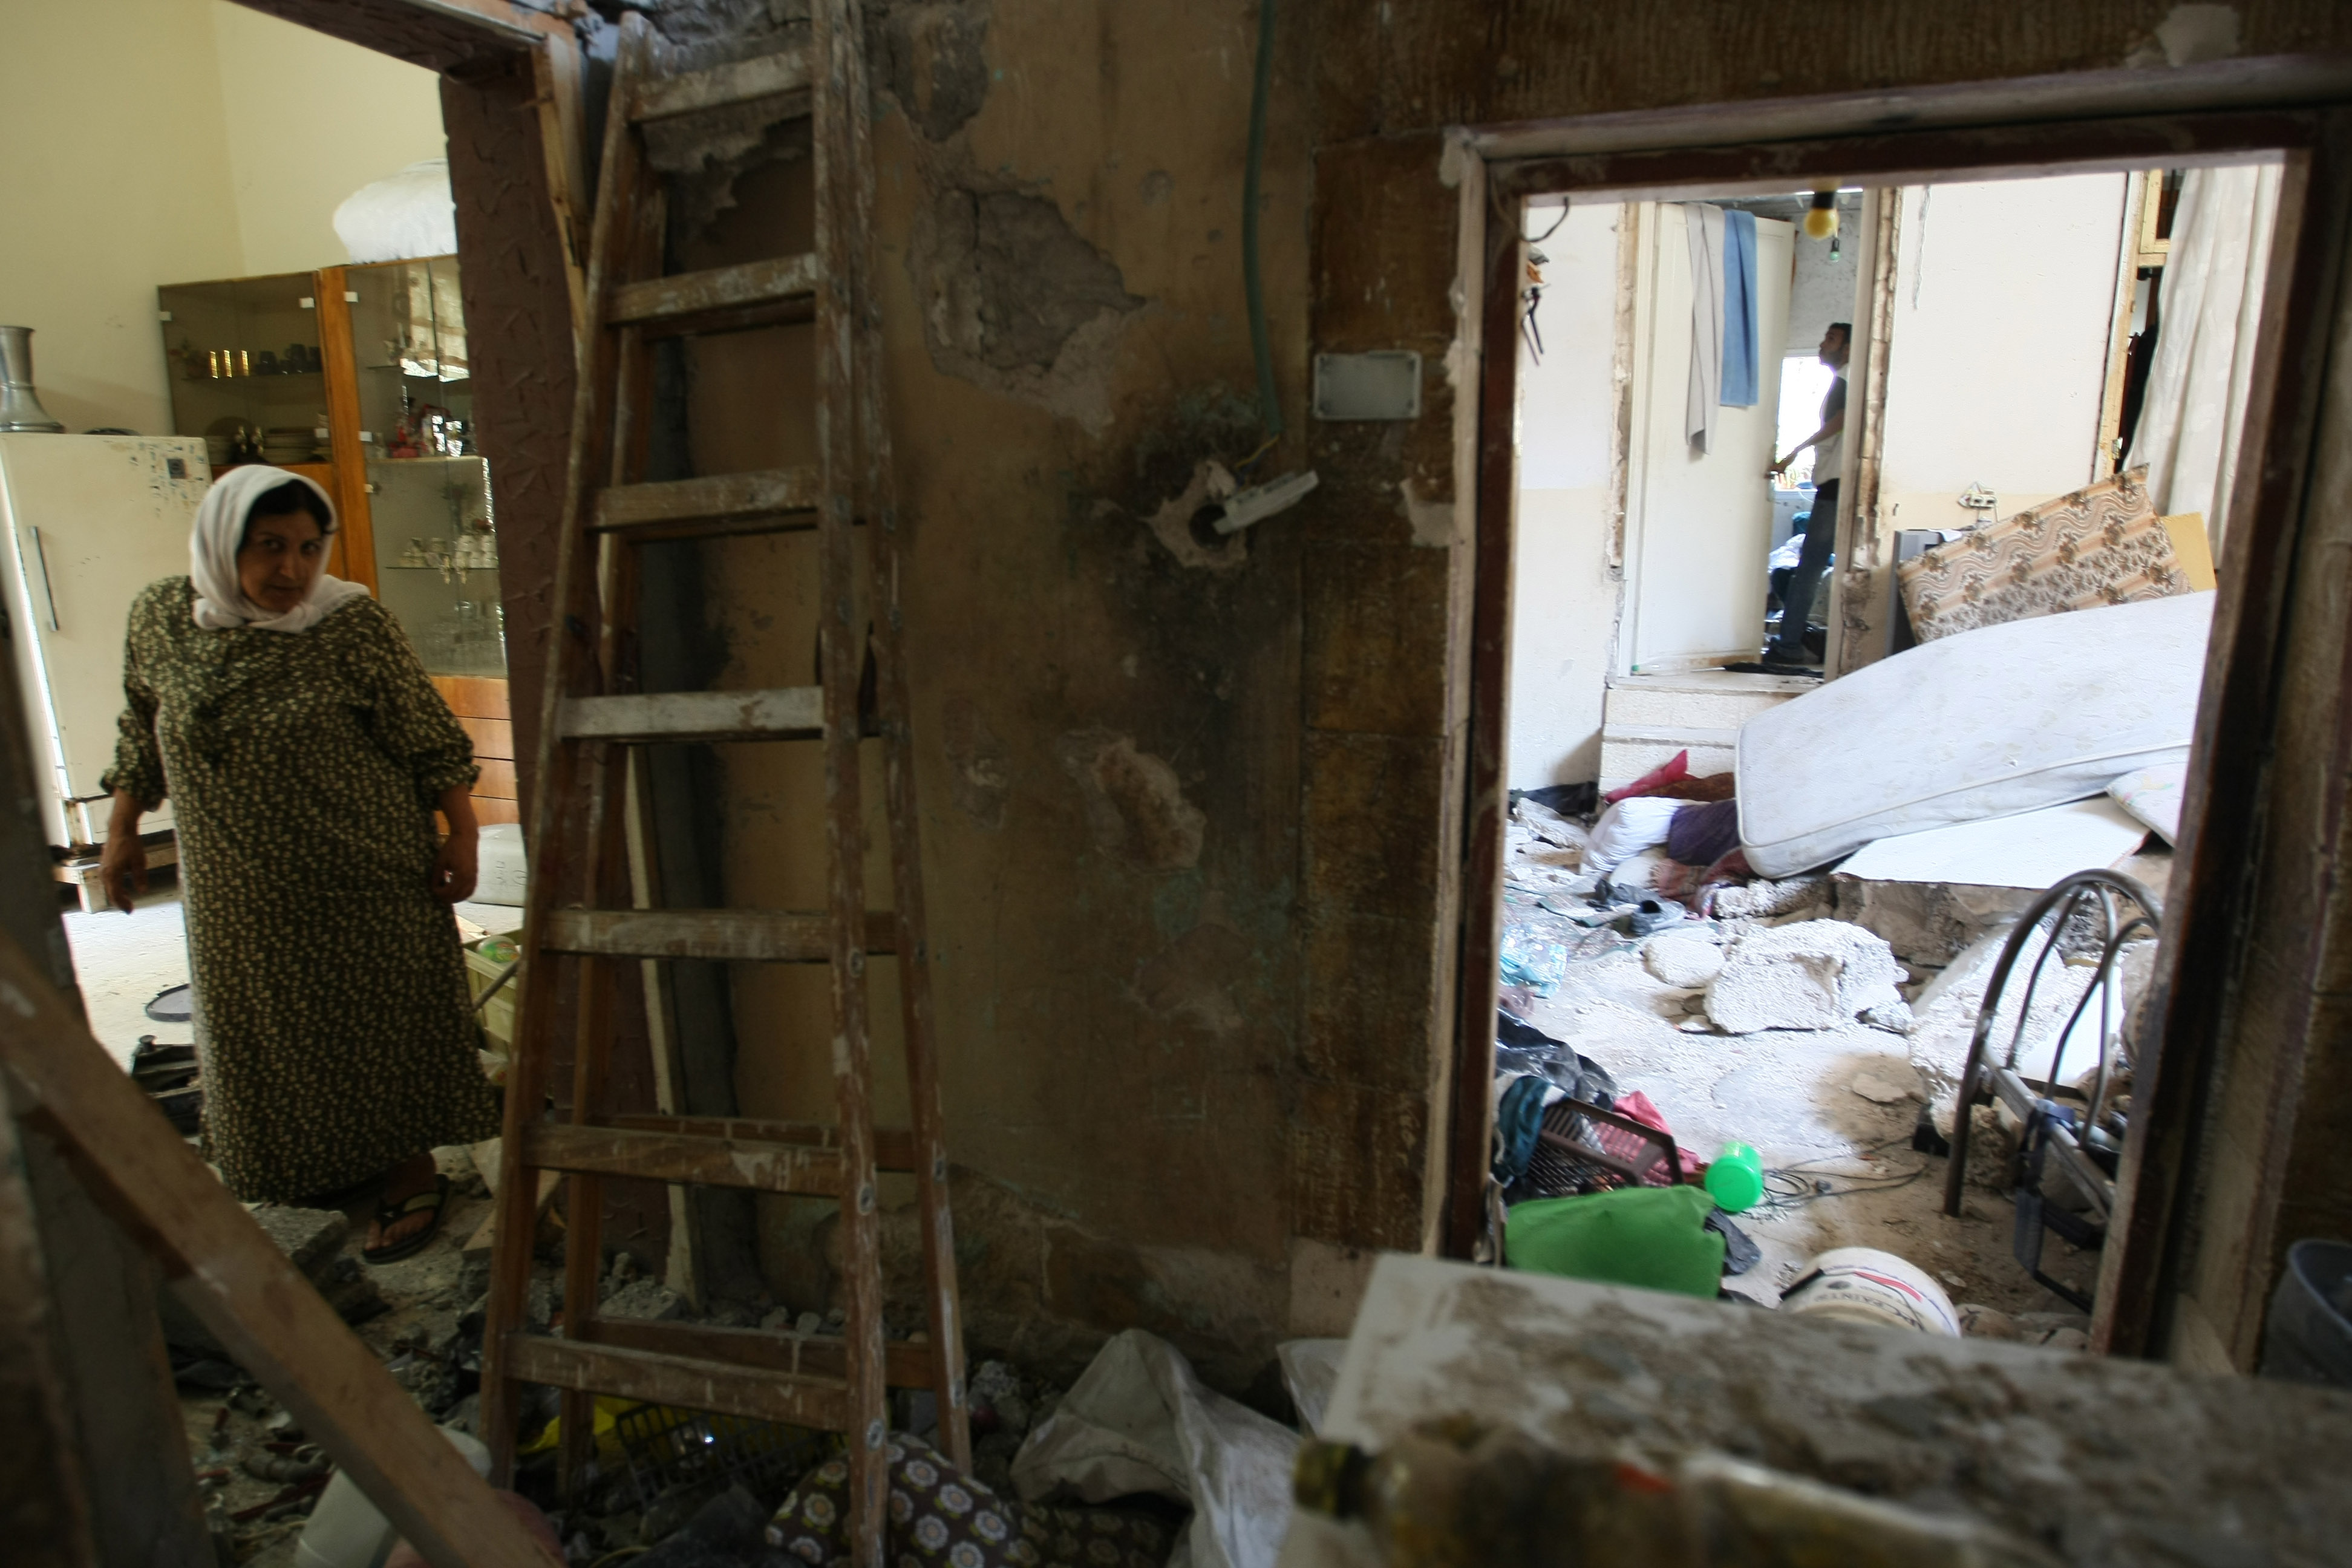 A Palestinian woman walks through the destroyed home of the Haruf family after Israeli forces carried out a raid on the abode in the West Bank City of Nablus on 28 July 28 (photo: AFP/JAAFAR ASHTIYRH)